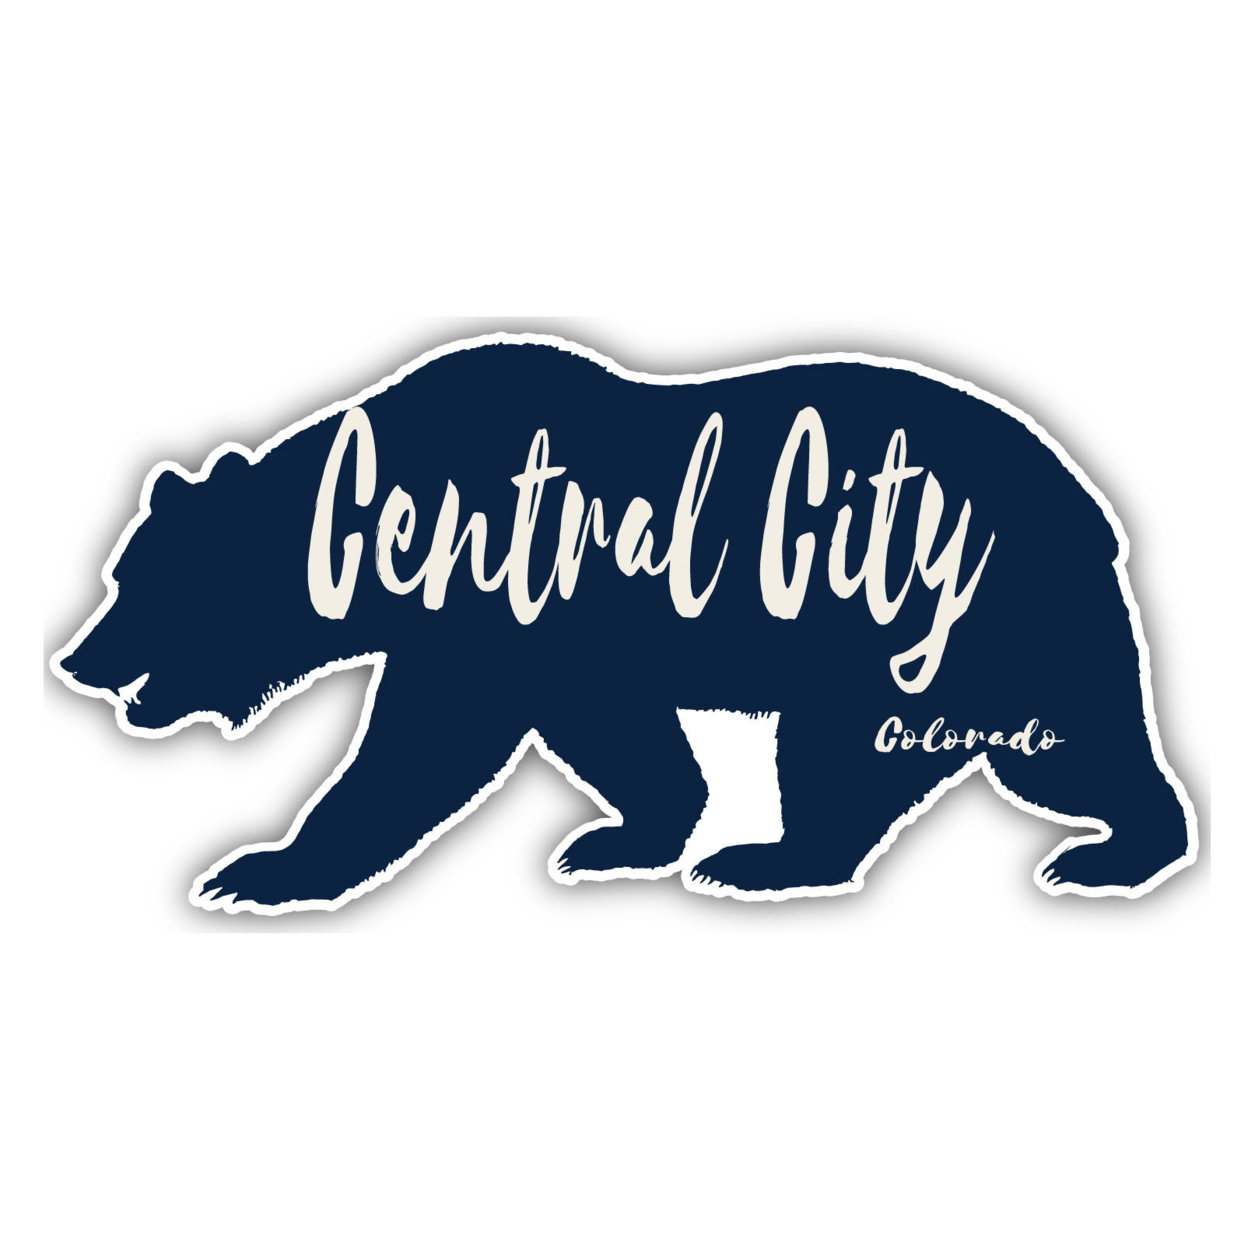 Central City Colorado Souvenir Decorative Stickers (Choose Theme And Size) - 4-Pack, 8-Inch, Camp Life